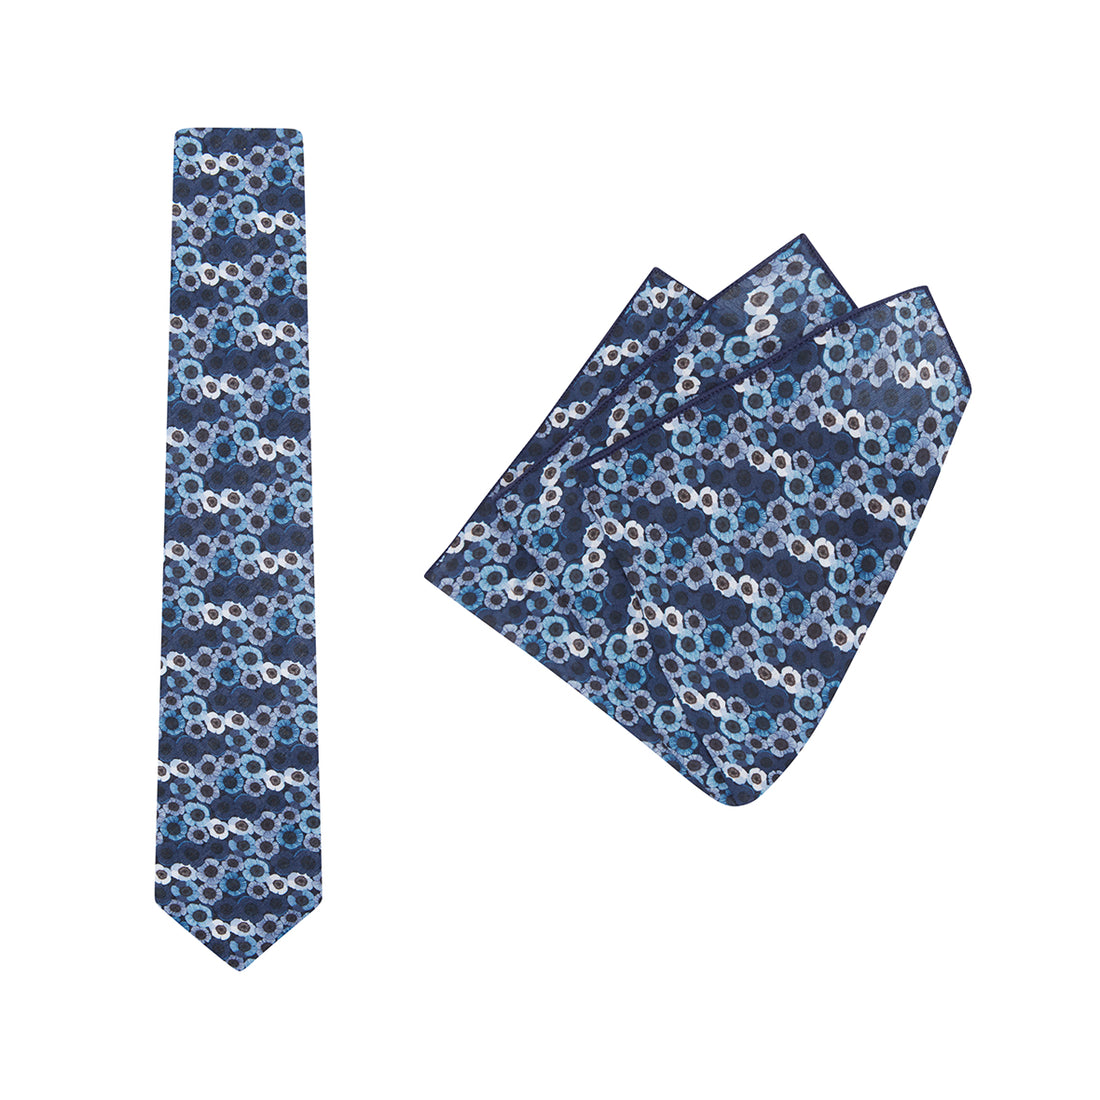 TIE + POCKET SQUARE SET. Jocelyn Proust Poppy Print. Navy/Silver. Supplied with matching pocket square.-Ties-PEROZ Accessories